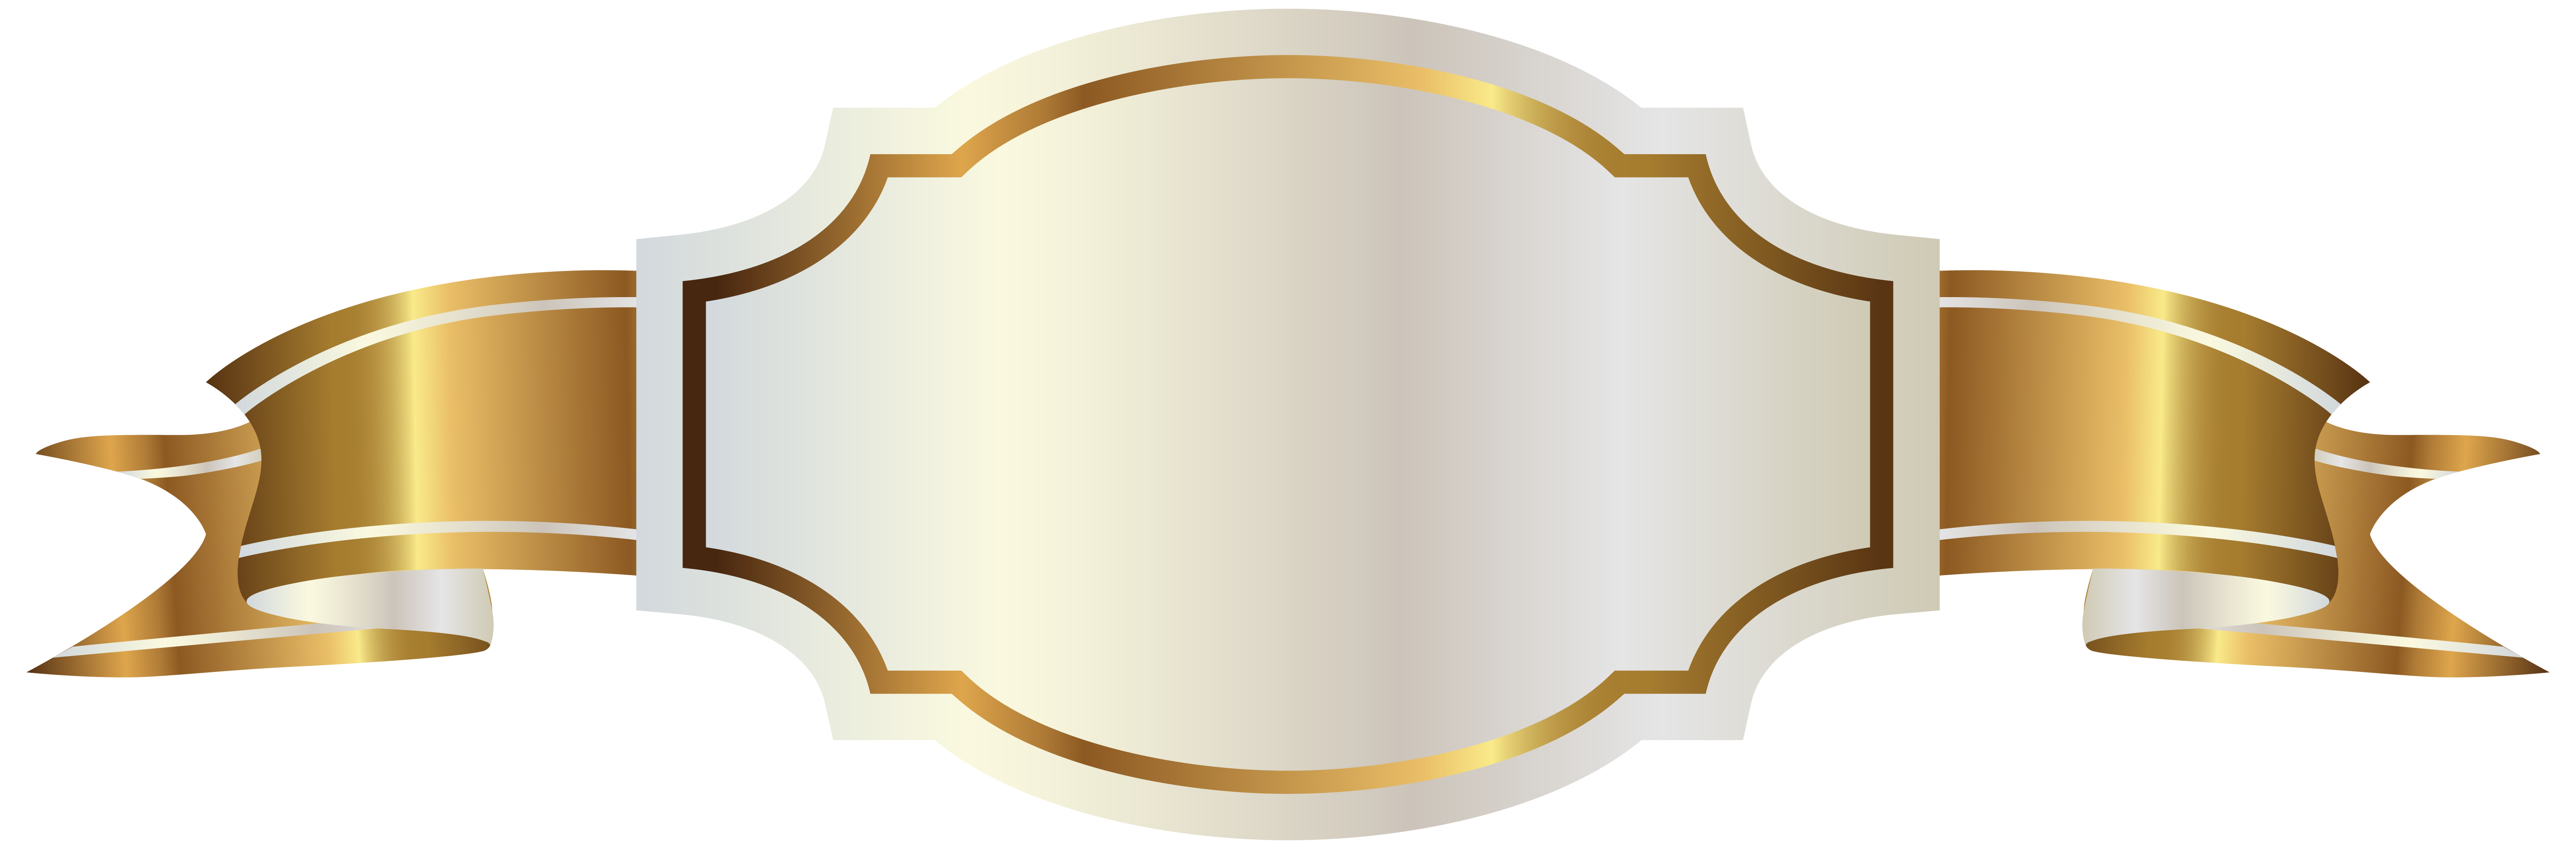 Dish clipart vintage. White label and gold